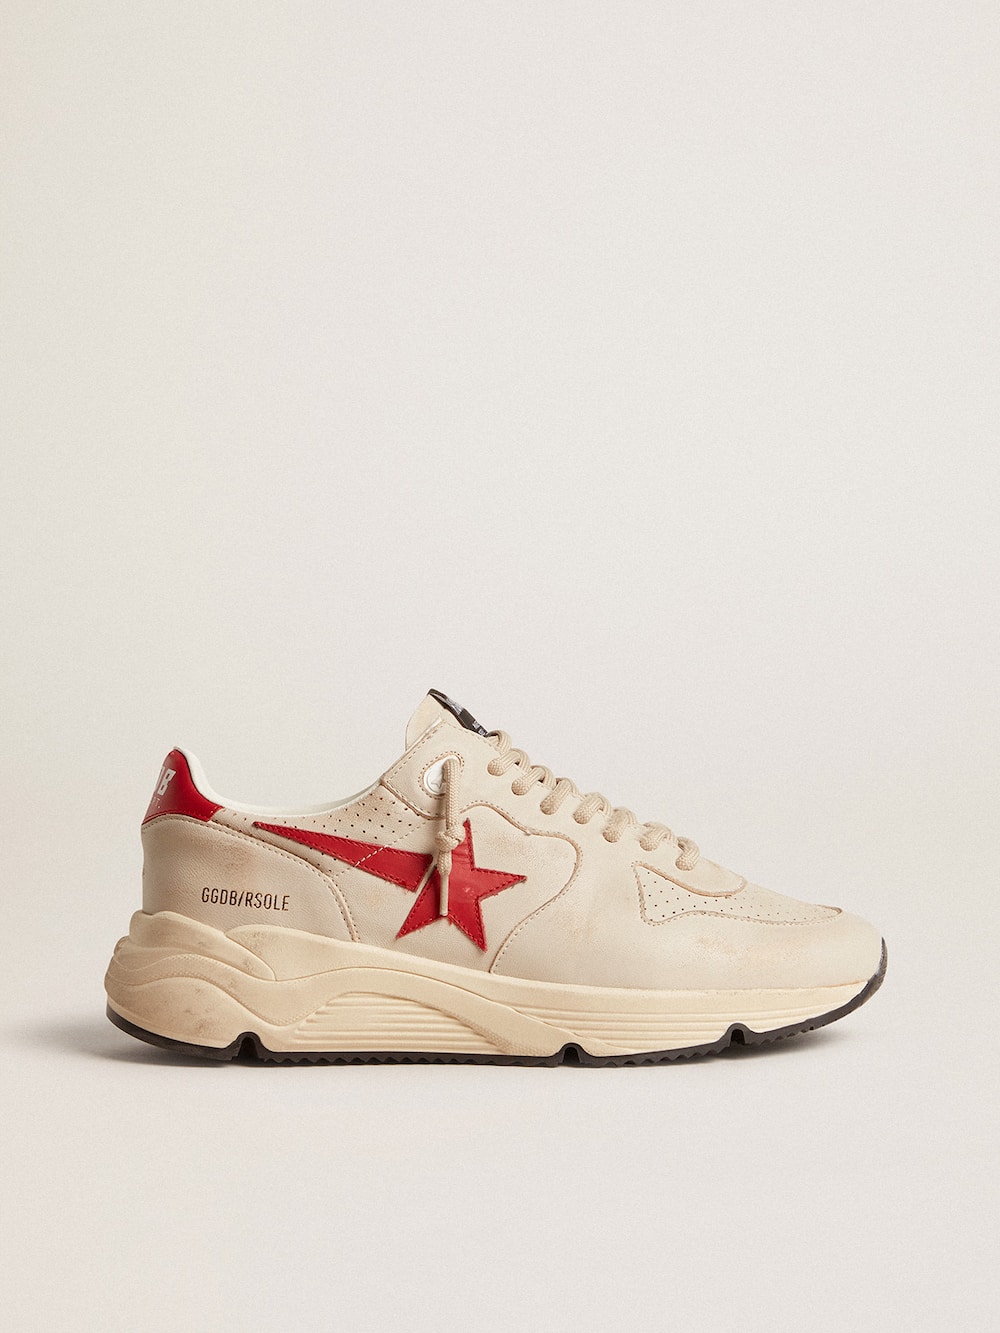 Golden Goose - Men's Running Sole in gray nappa leather with red nappa leather star and heel tab in 